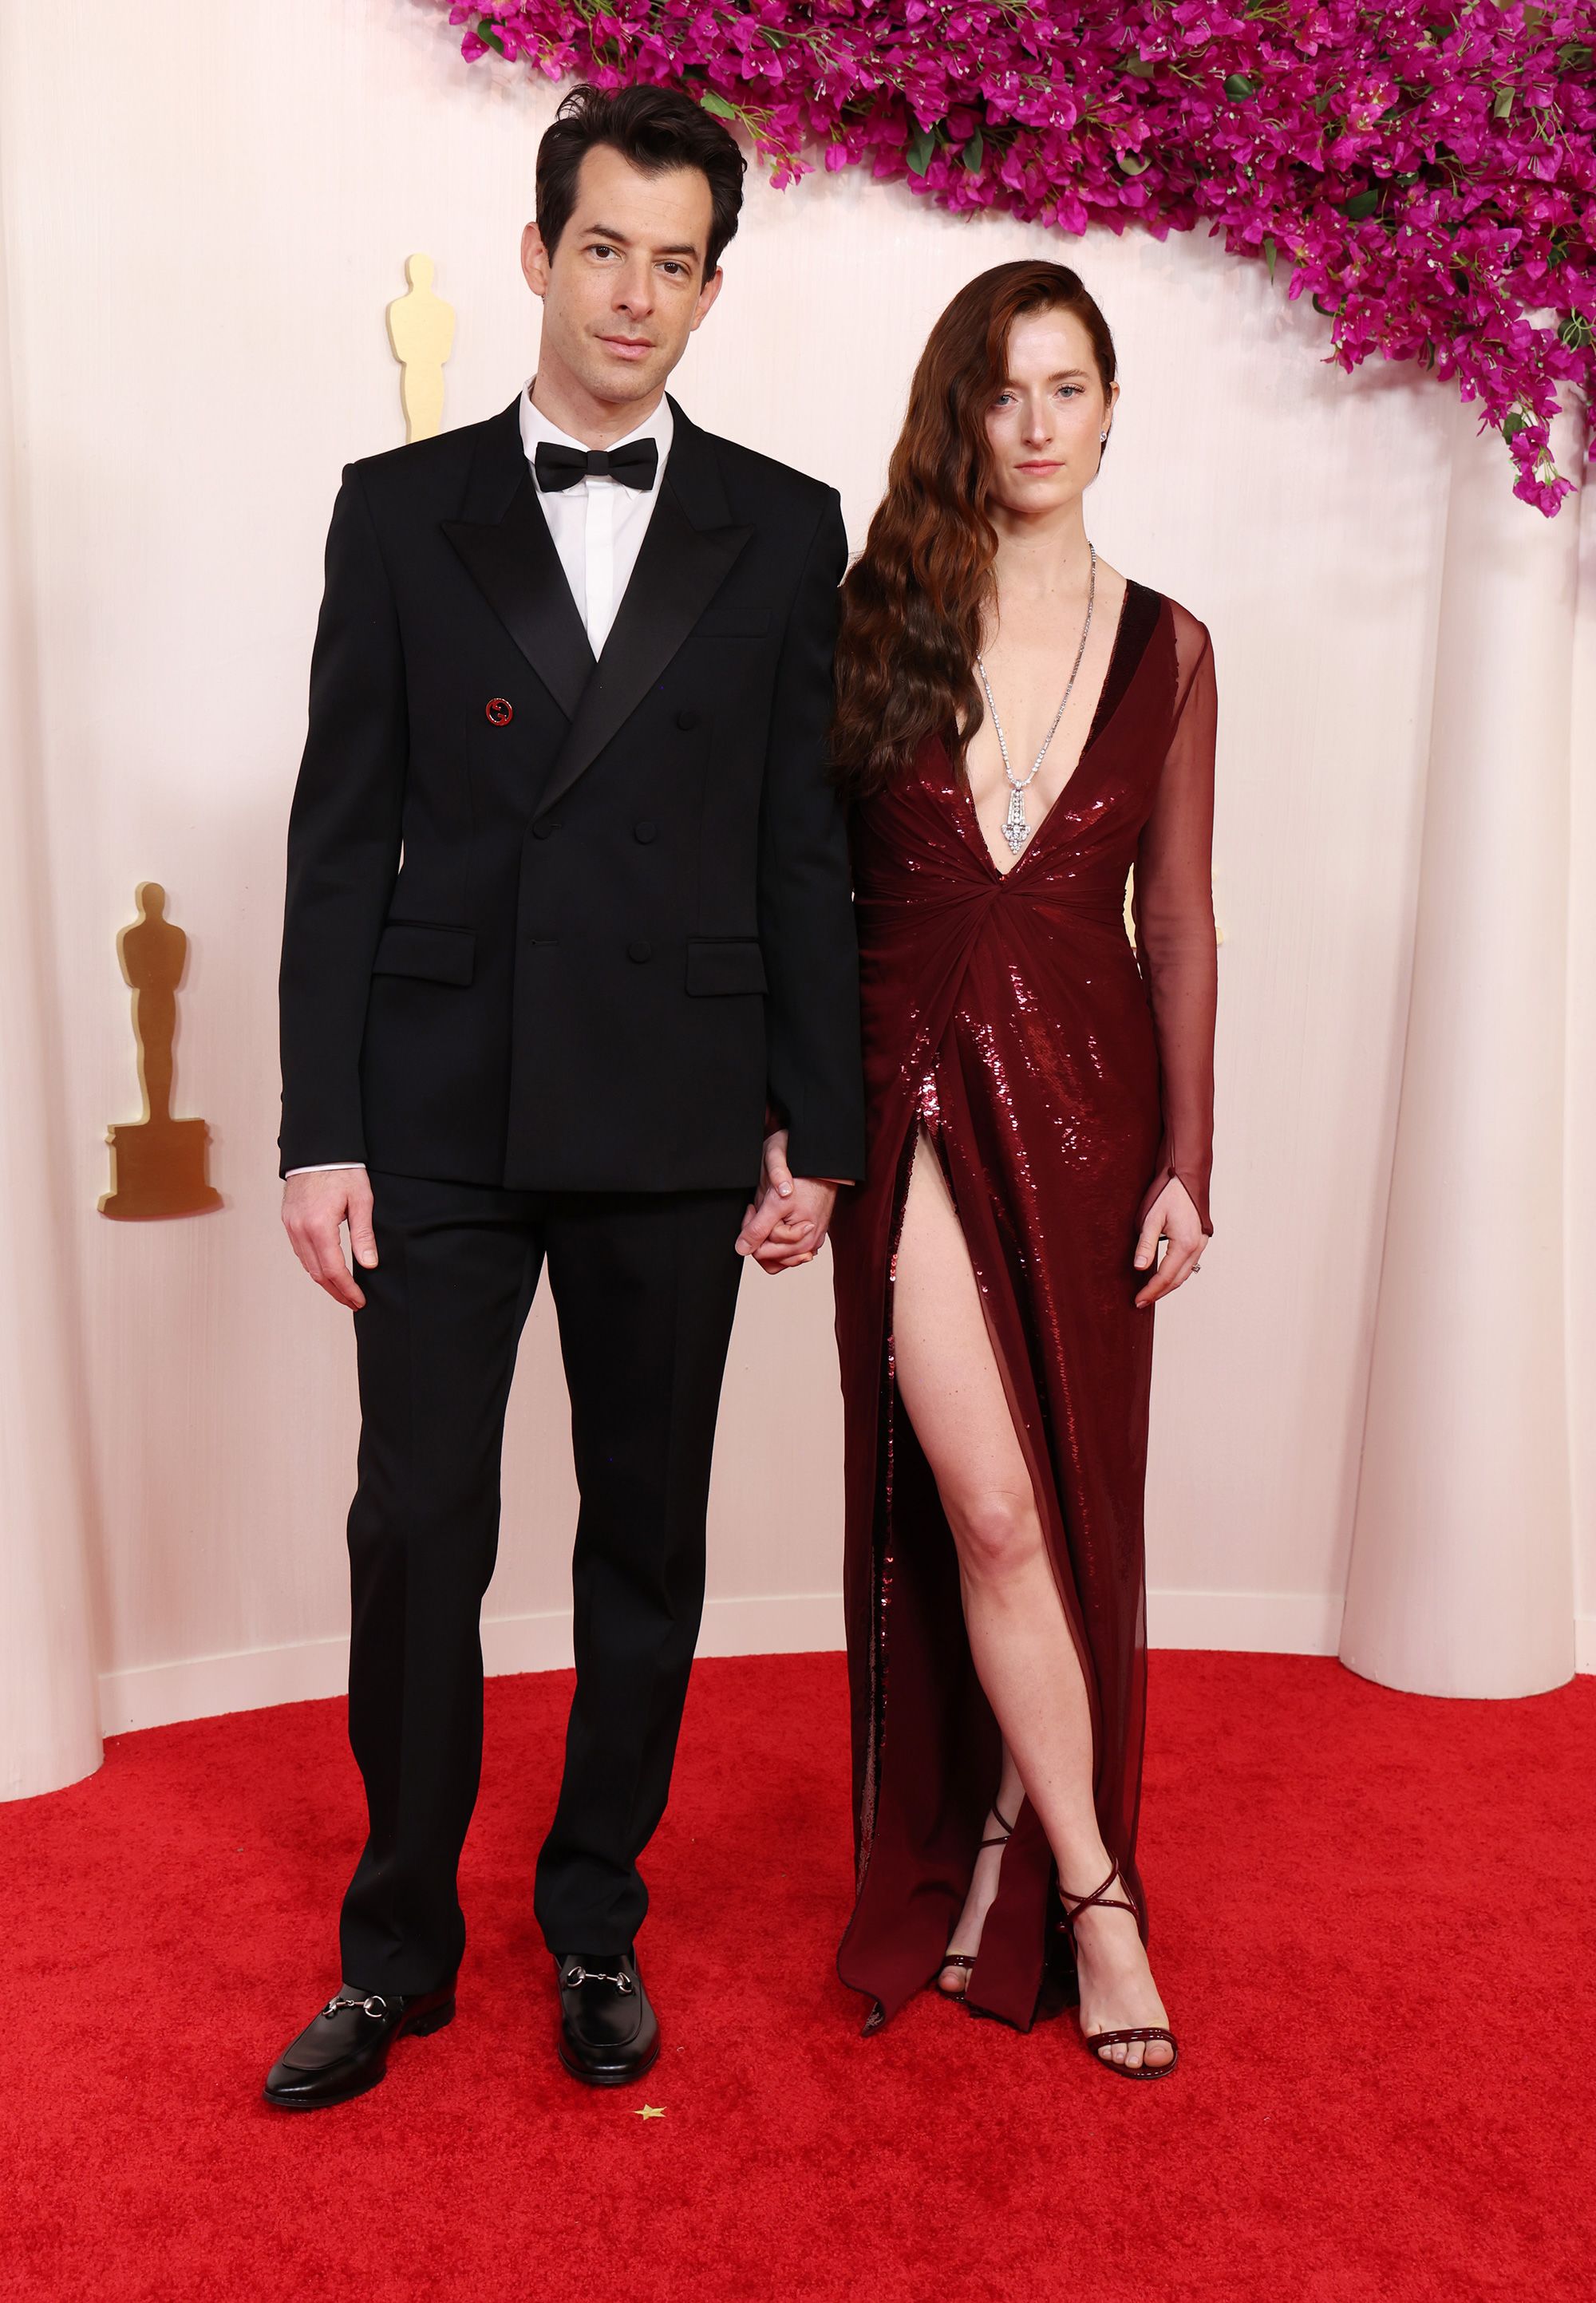 Best Original Song nominee (for “I'm Just Ken”) Mark Ronson wore a classic Gucci double-breasted suit.  His wife Grace Gummer opted for a low-cut red Gucci dress and Briony Raymond jewelry.